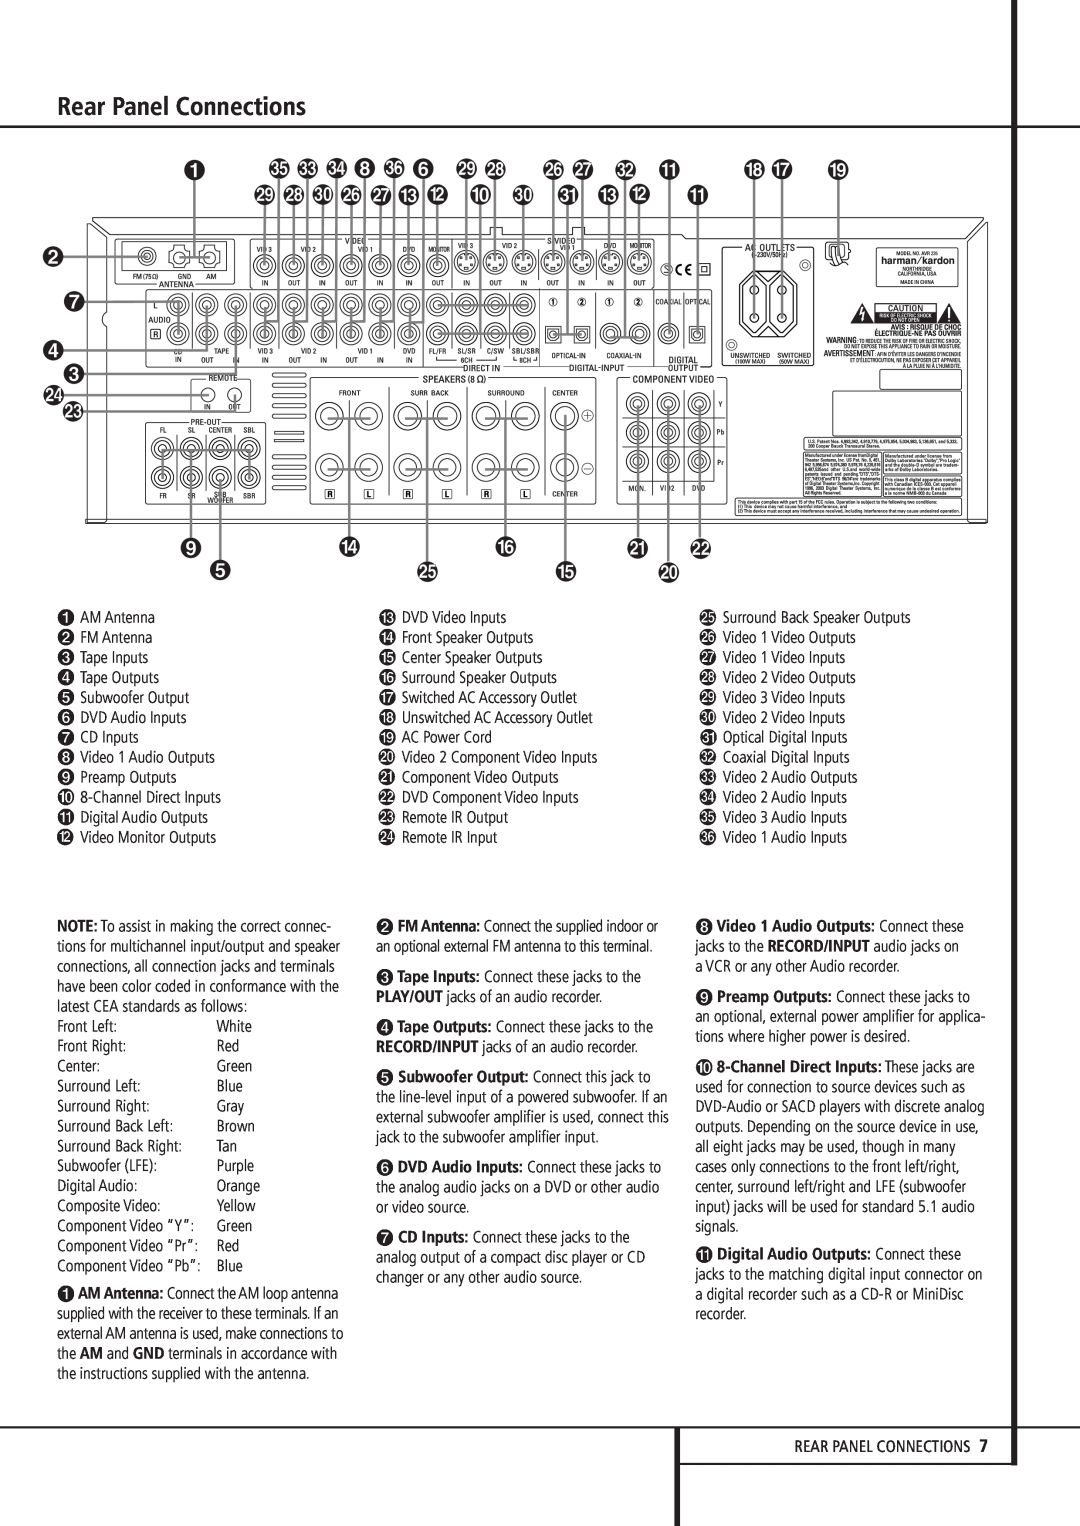 Harman-Kardon AVR 235 owner manual Rear Panel Connections, Digital Audio Outputs Connect these 